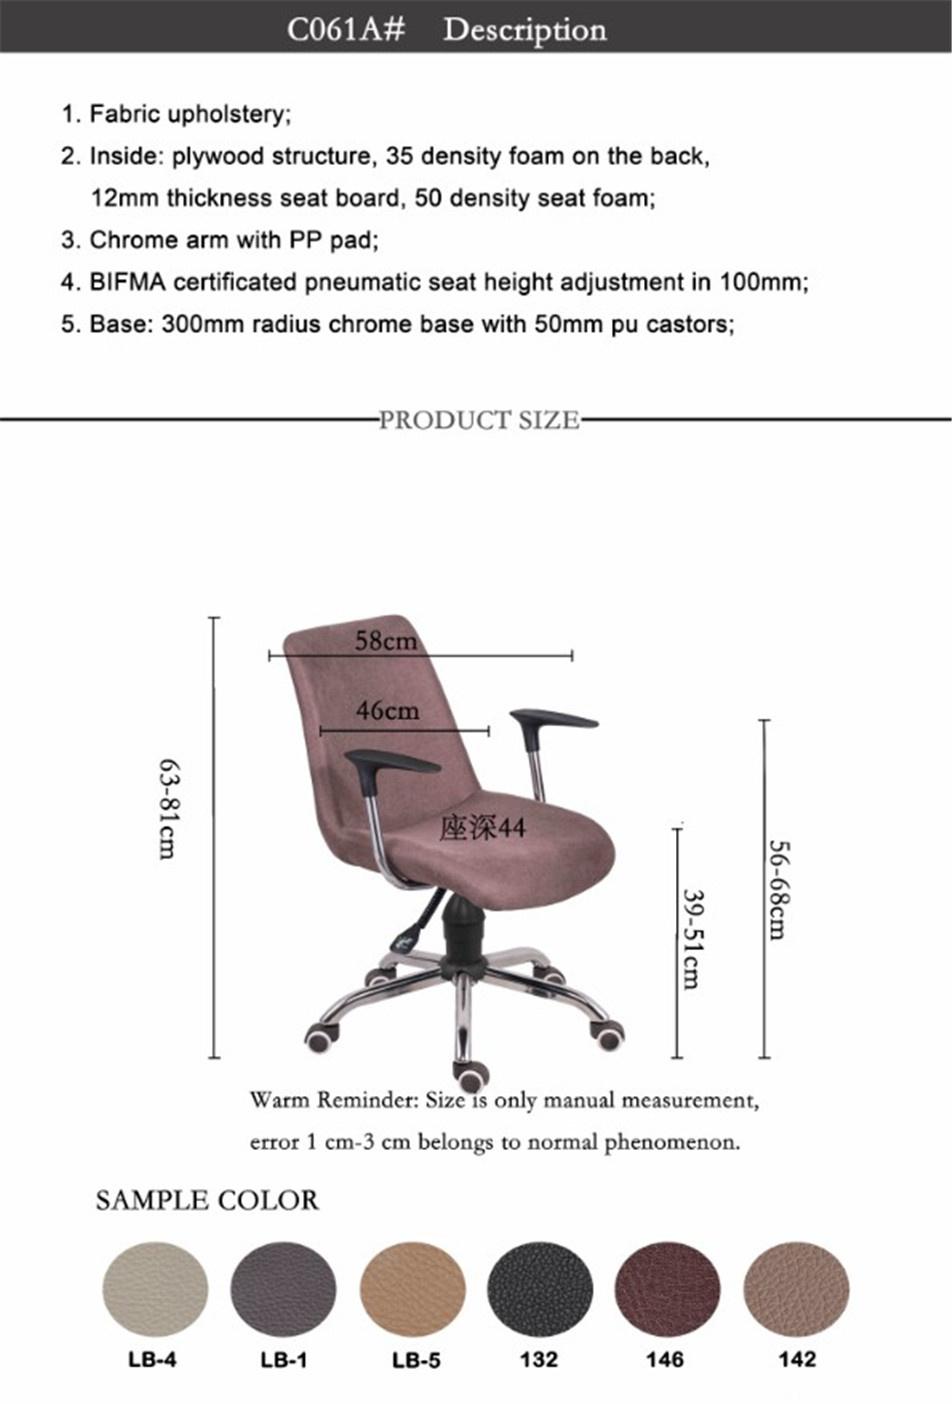 Modern Design Working Chair Fabric Staff Chair Stand Office Chair